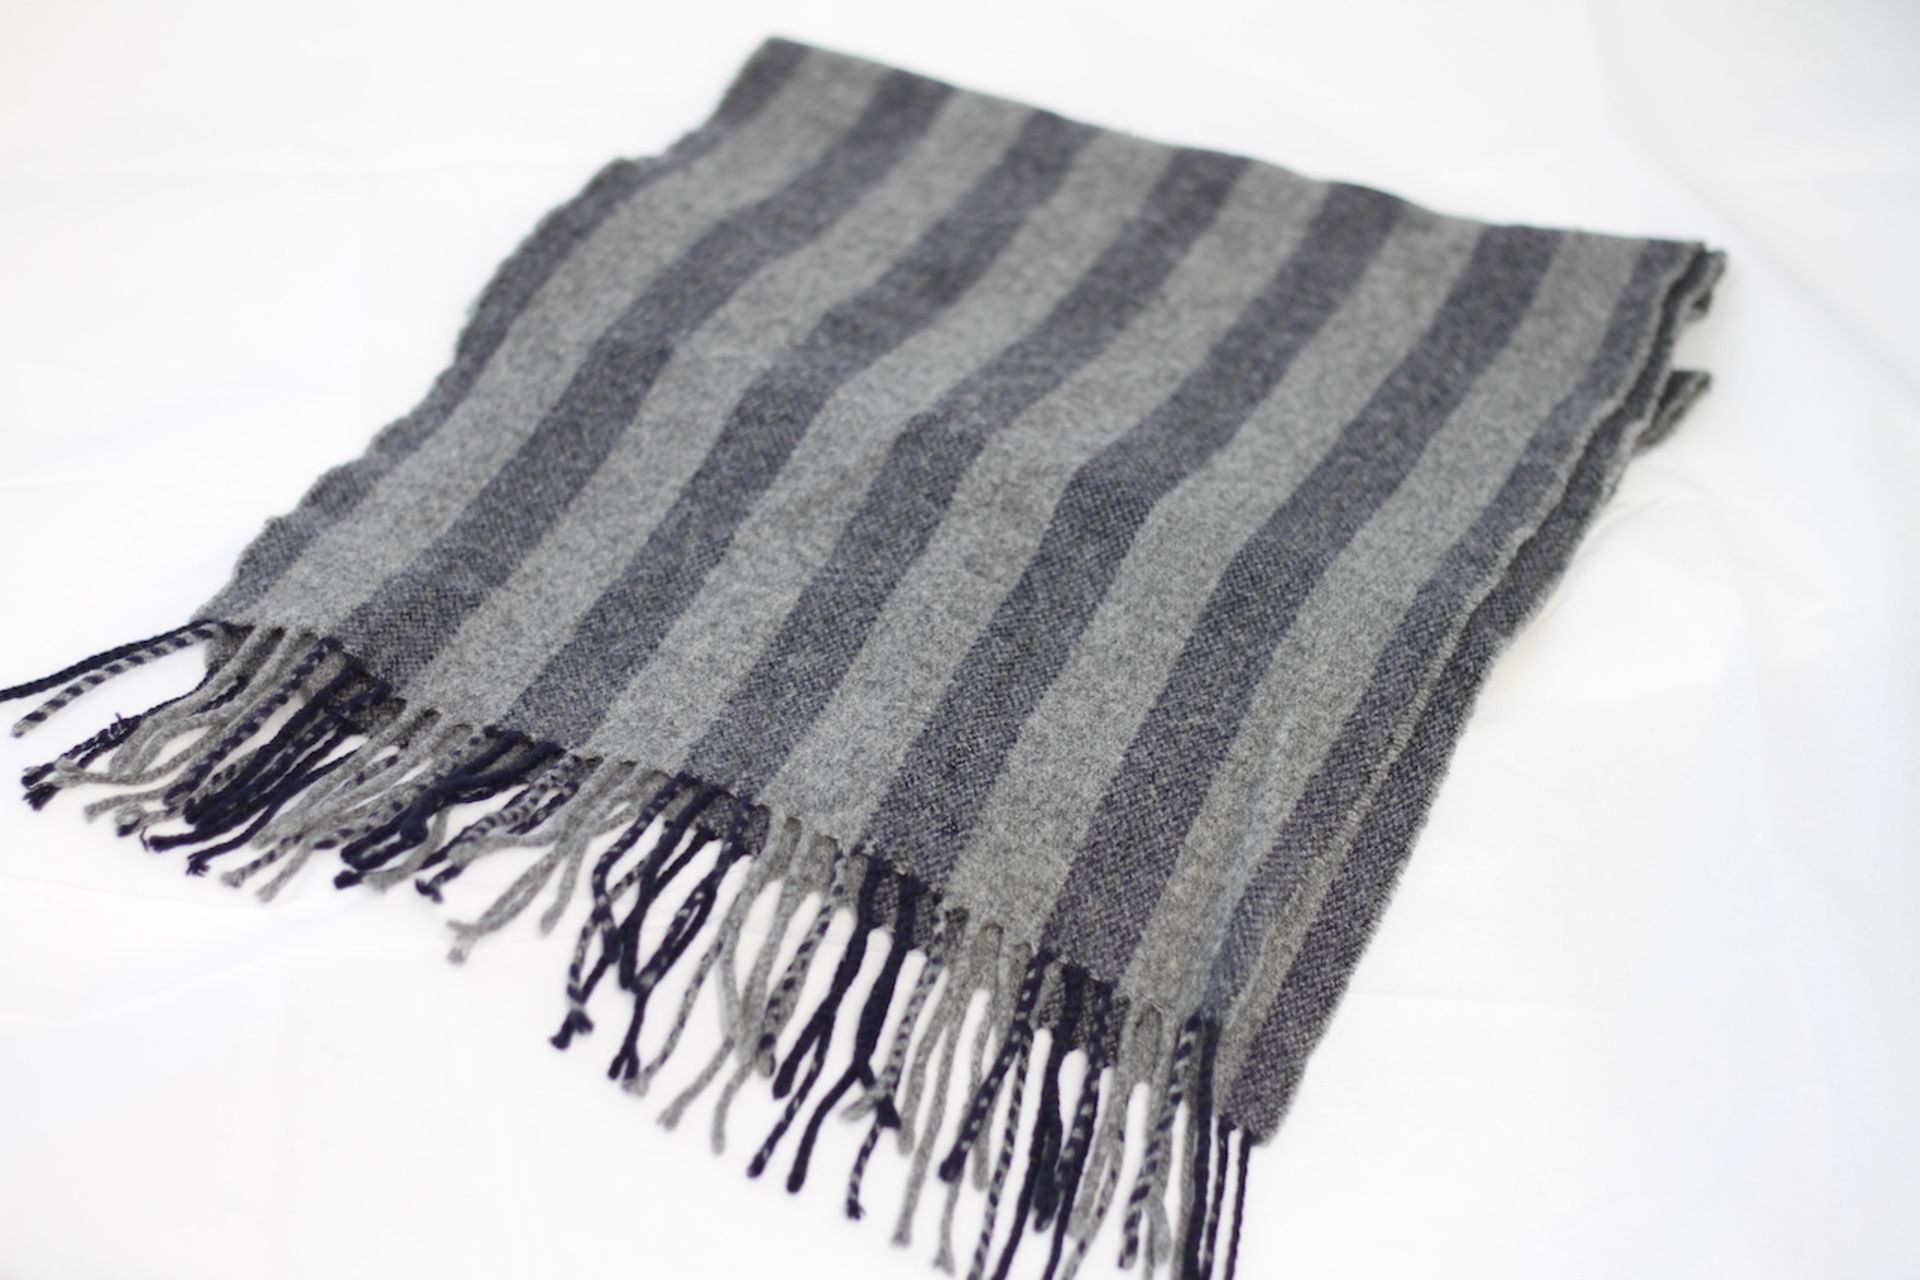 HUGO BOSS SCARF, Colour : GREY / BLUE, AGE: UNKNOWN, SIZE: ONE SIZE, CONDITION GRADE: 1 VERY